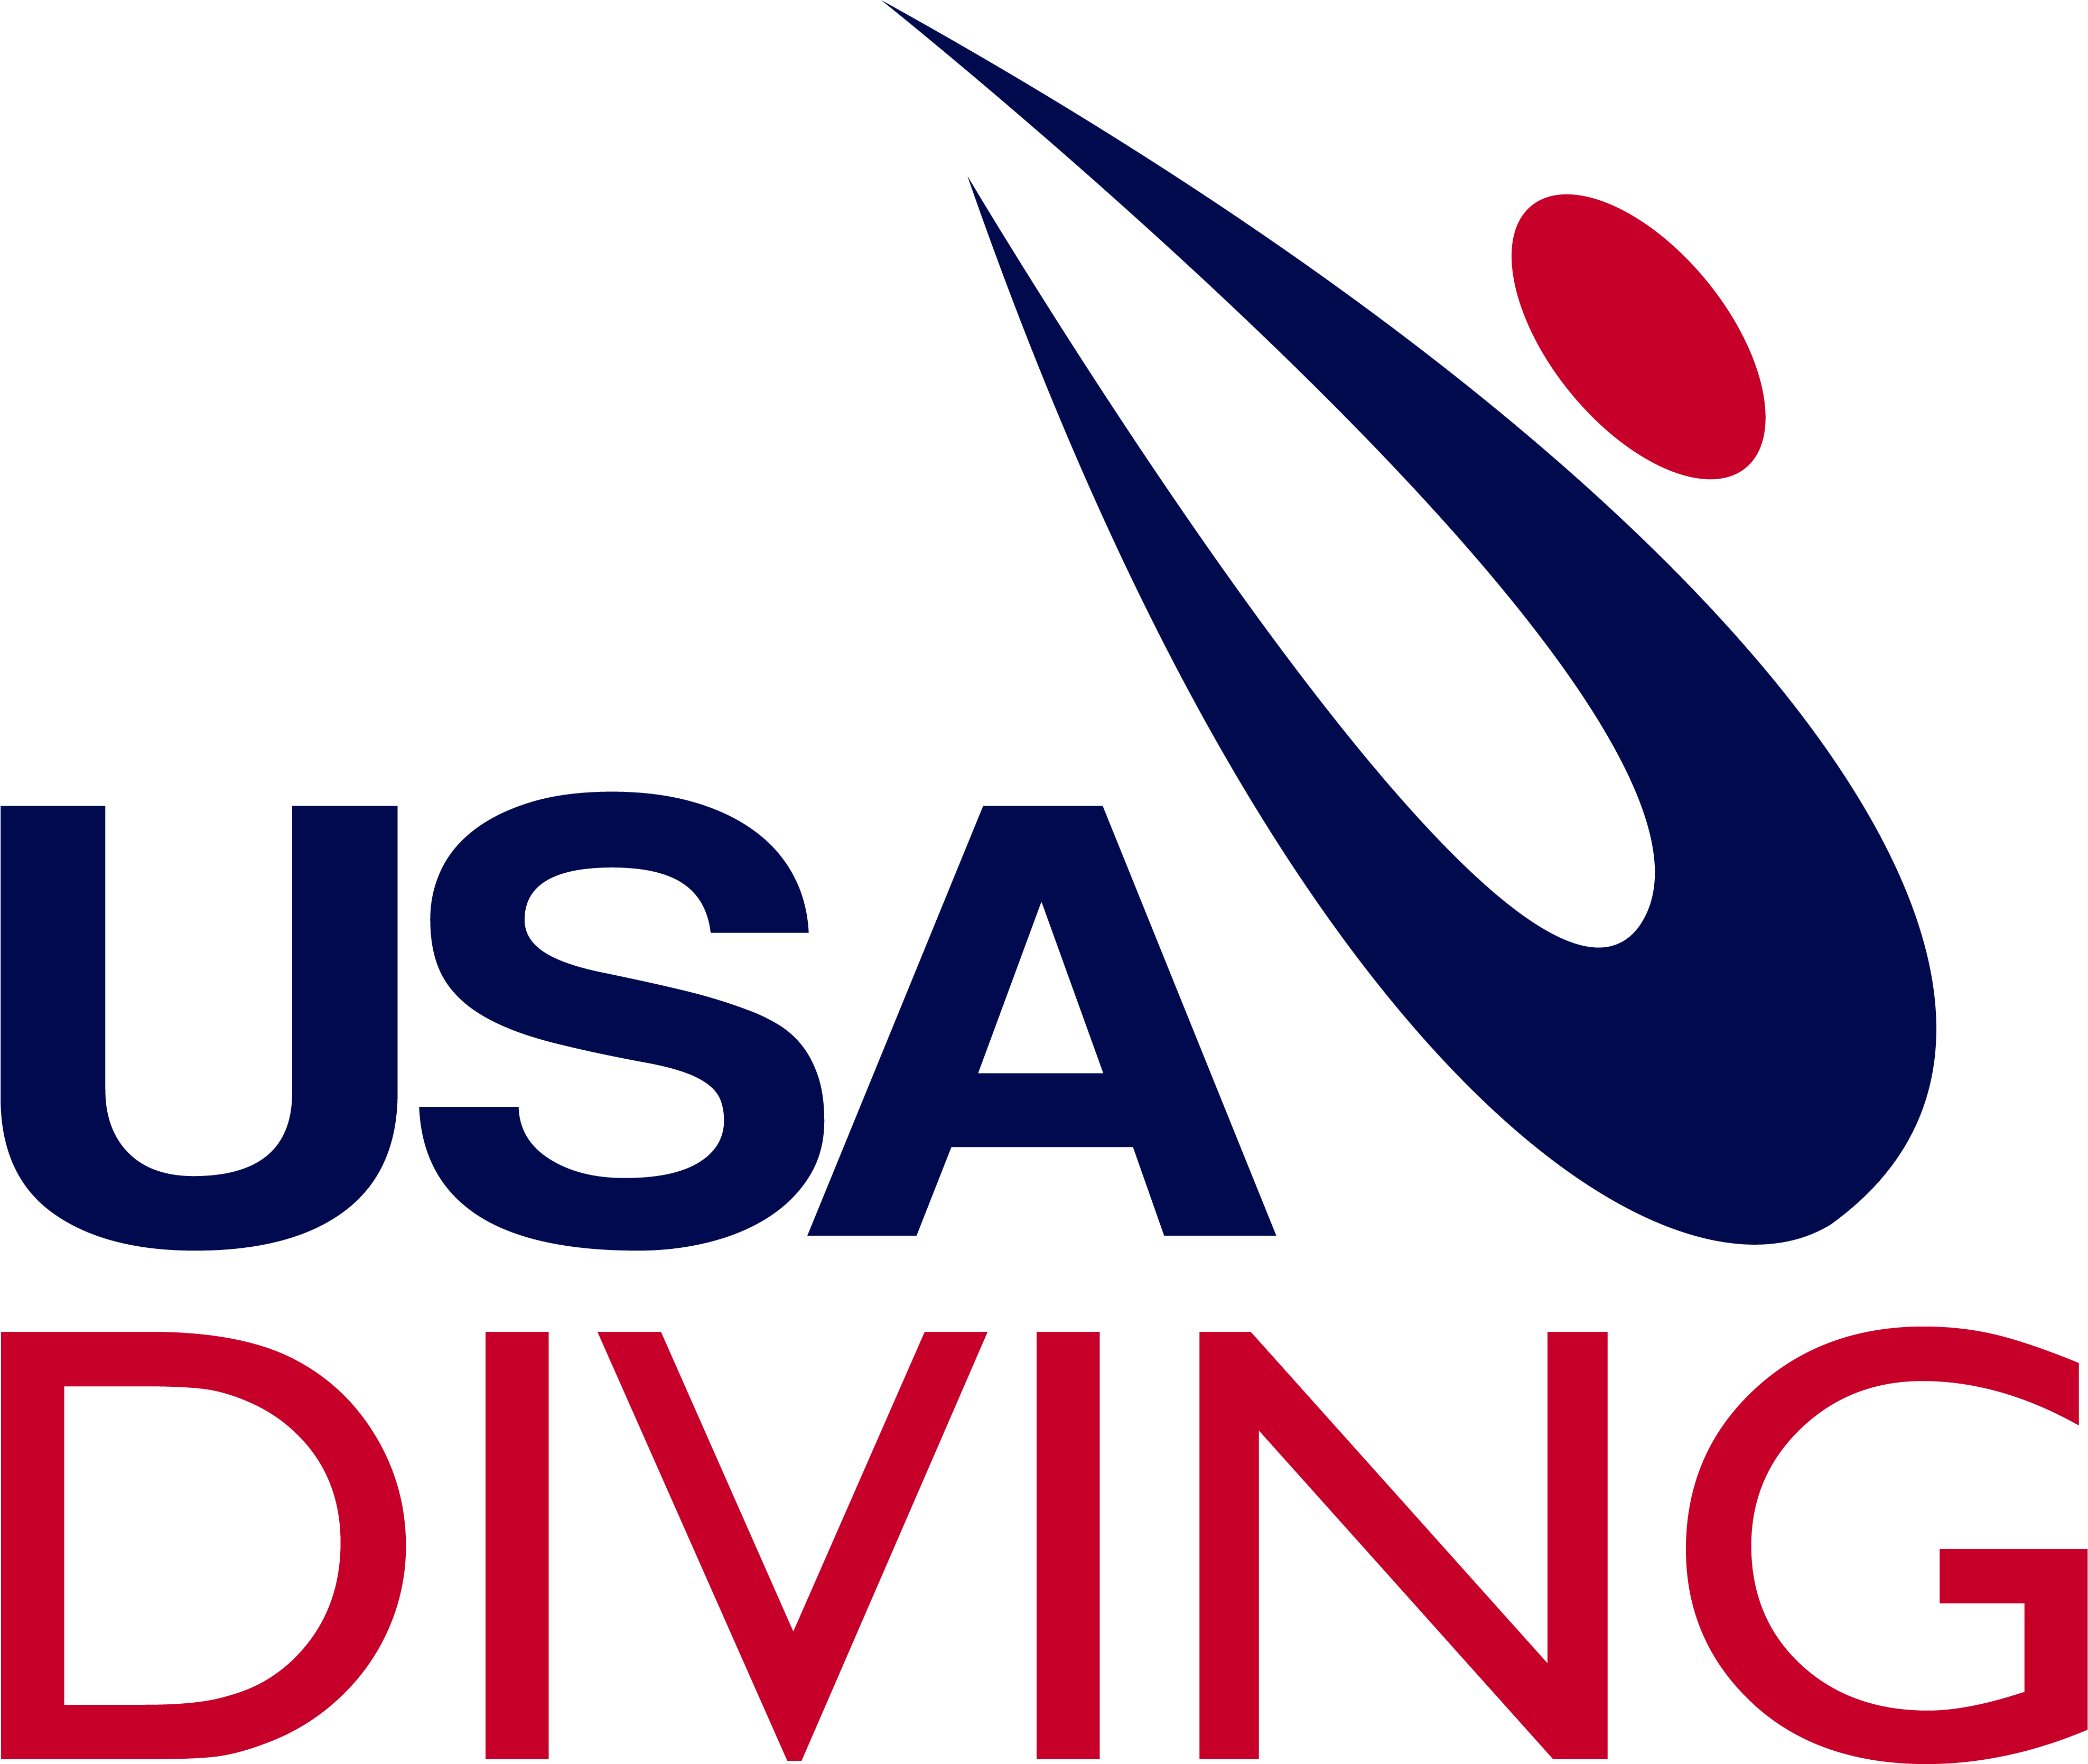 Springboard Diving Logo Www Imgkid Com The Image Kid - Usa Diving (4125x3663)